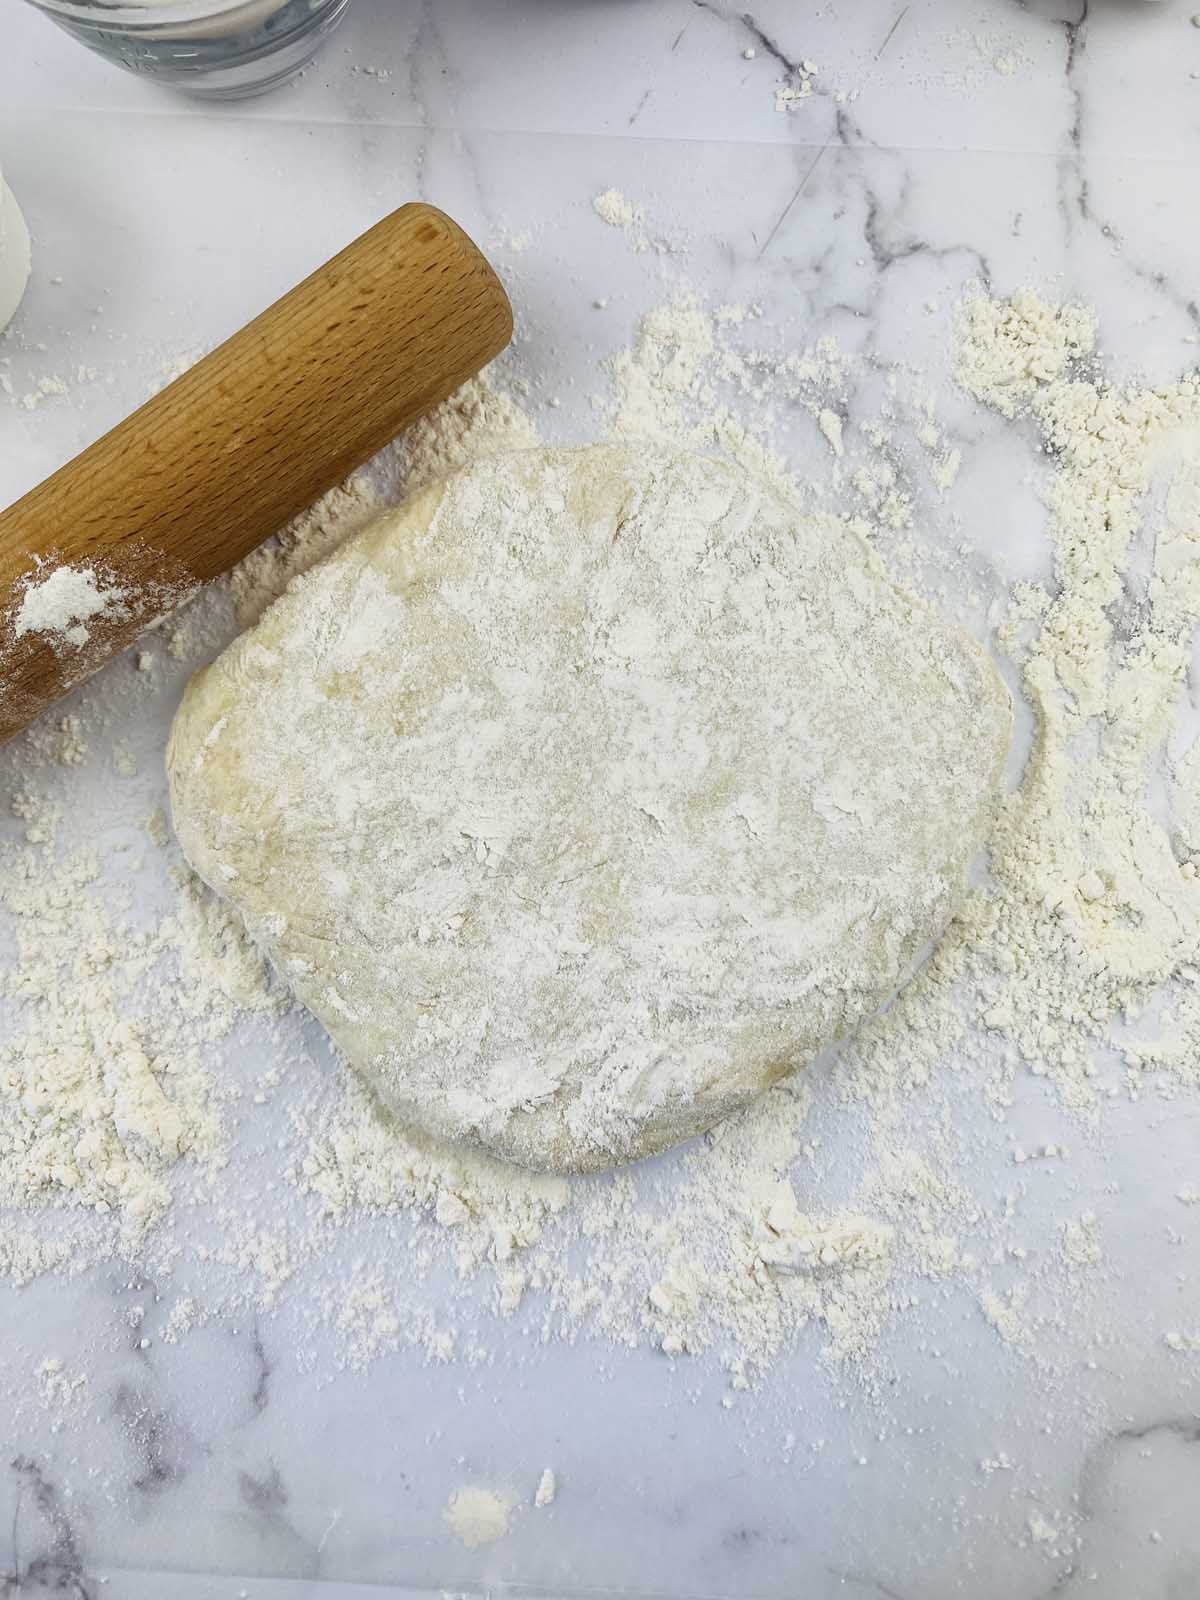 The ball of dough floured with a rolling pin.